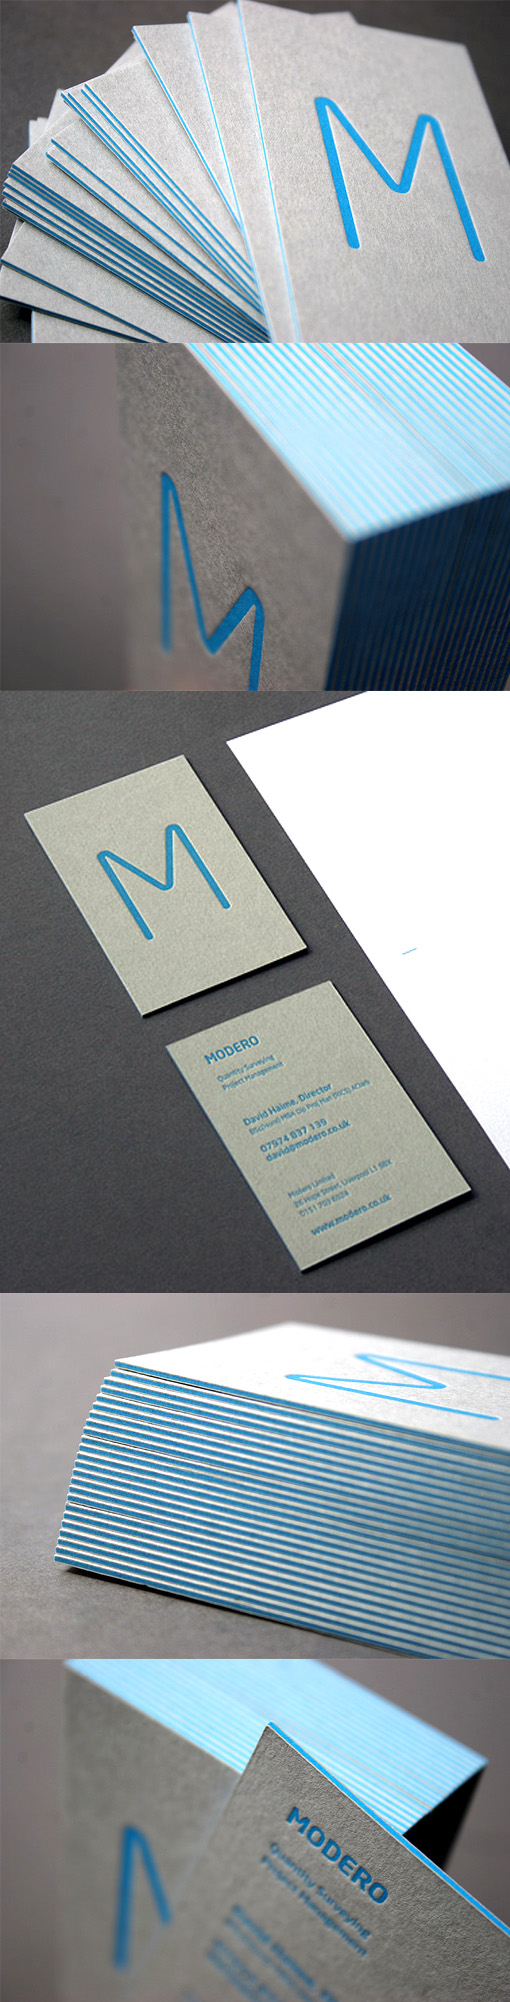 Minimalist Business Card Letterpress Printed On Recycled Card Stock